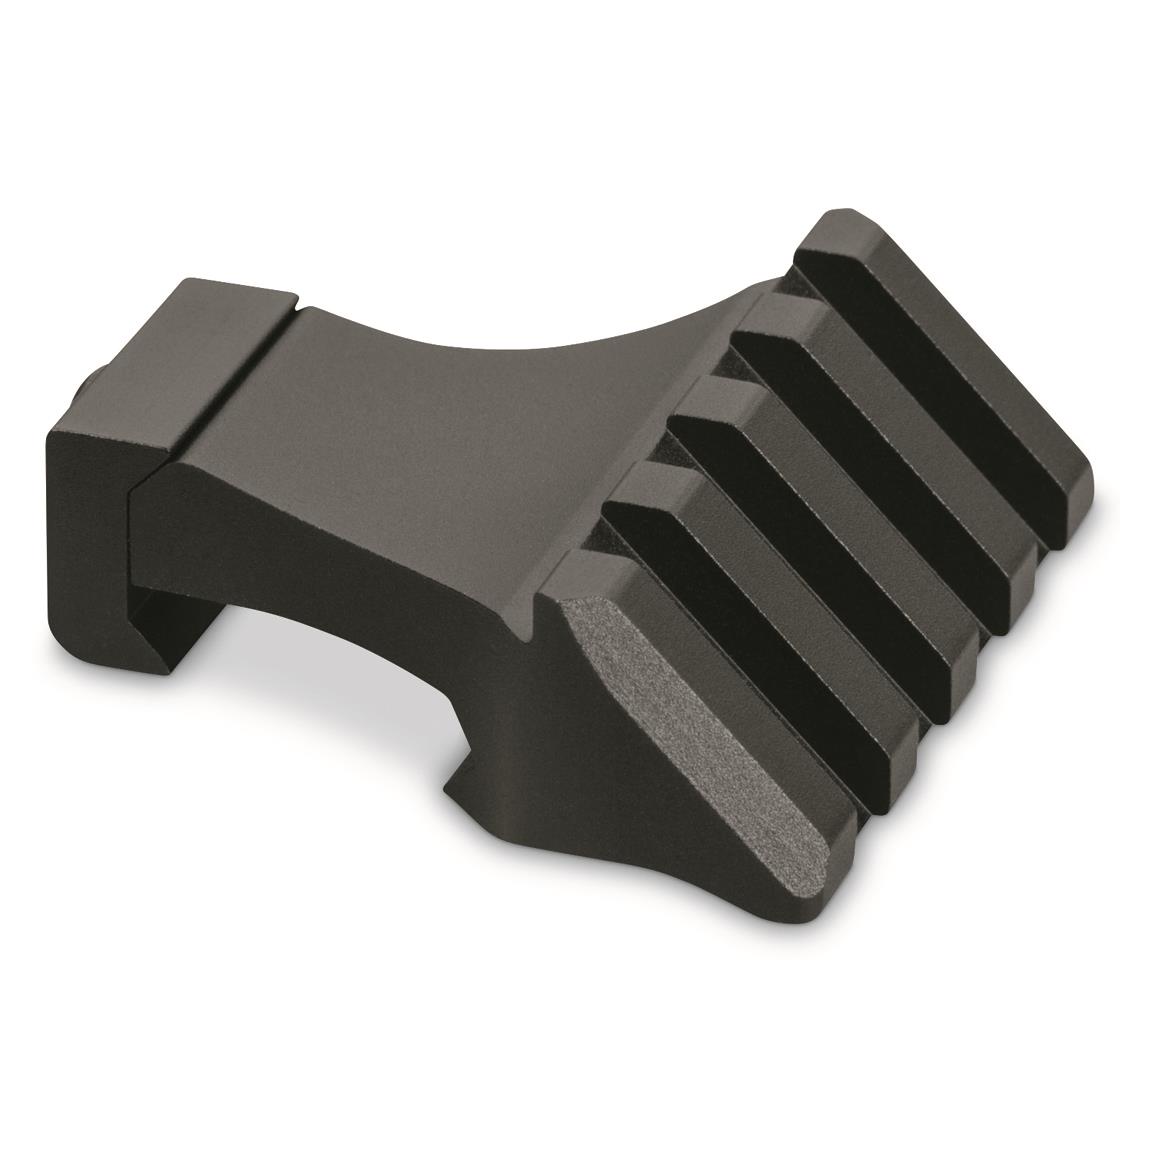 Vortex 45 Degree Mount for Red Dot Sights